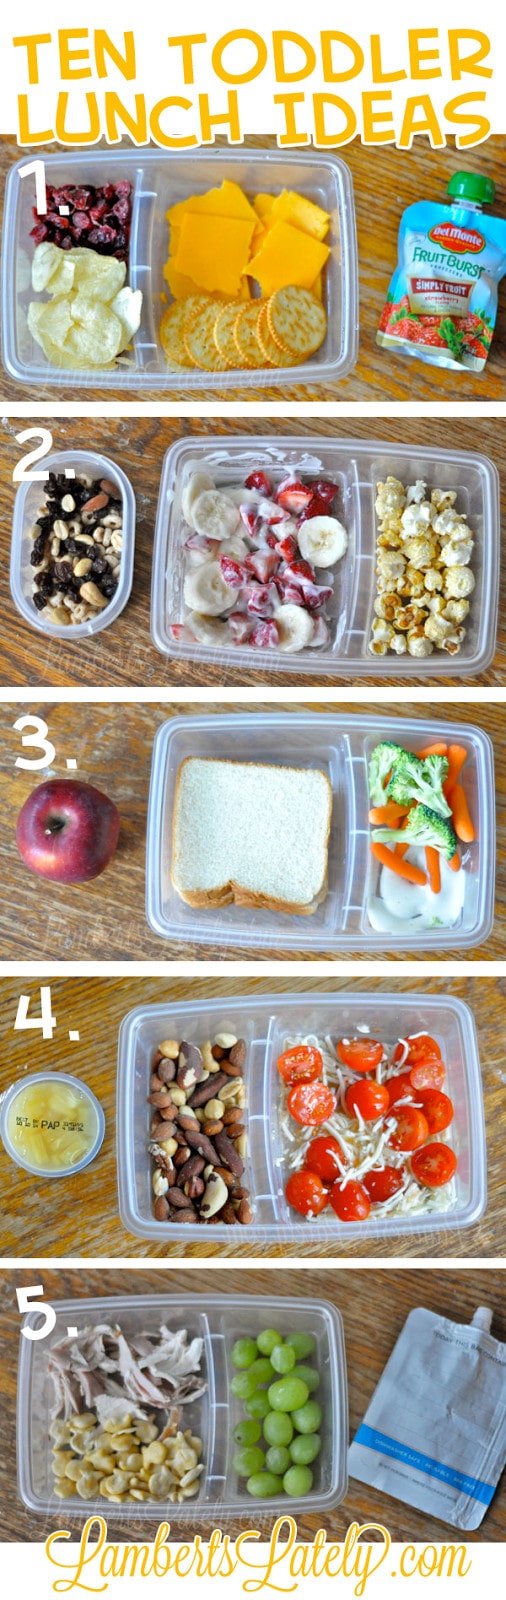 toddler_lunch_ideas